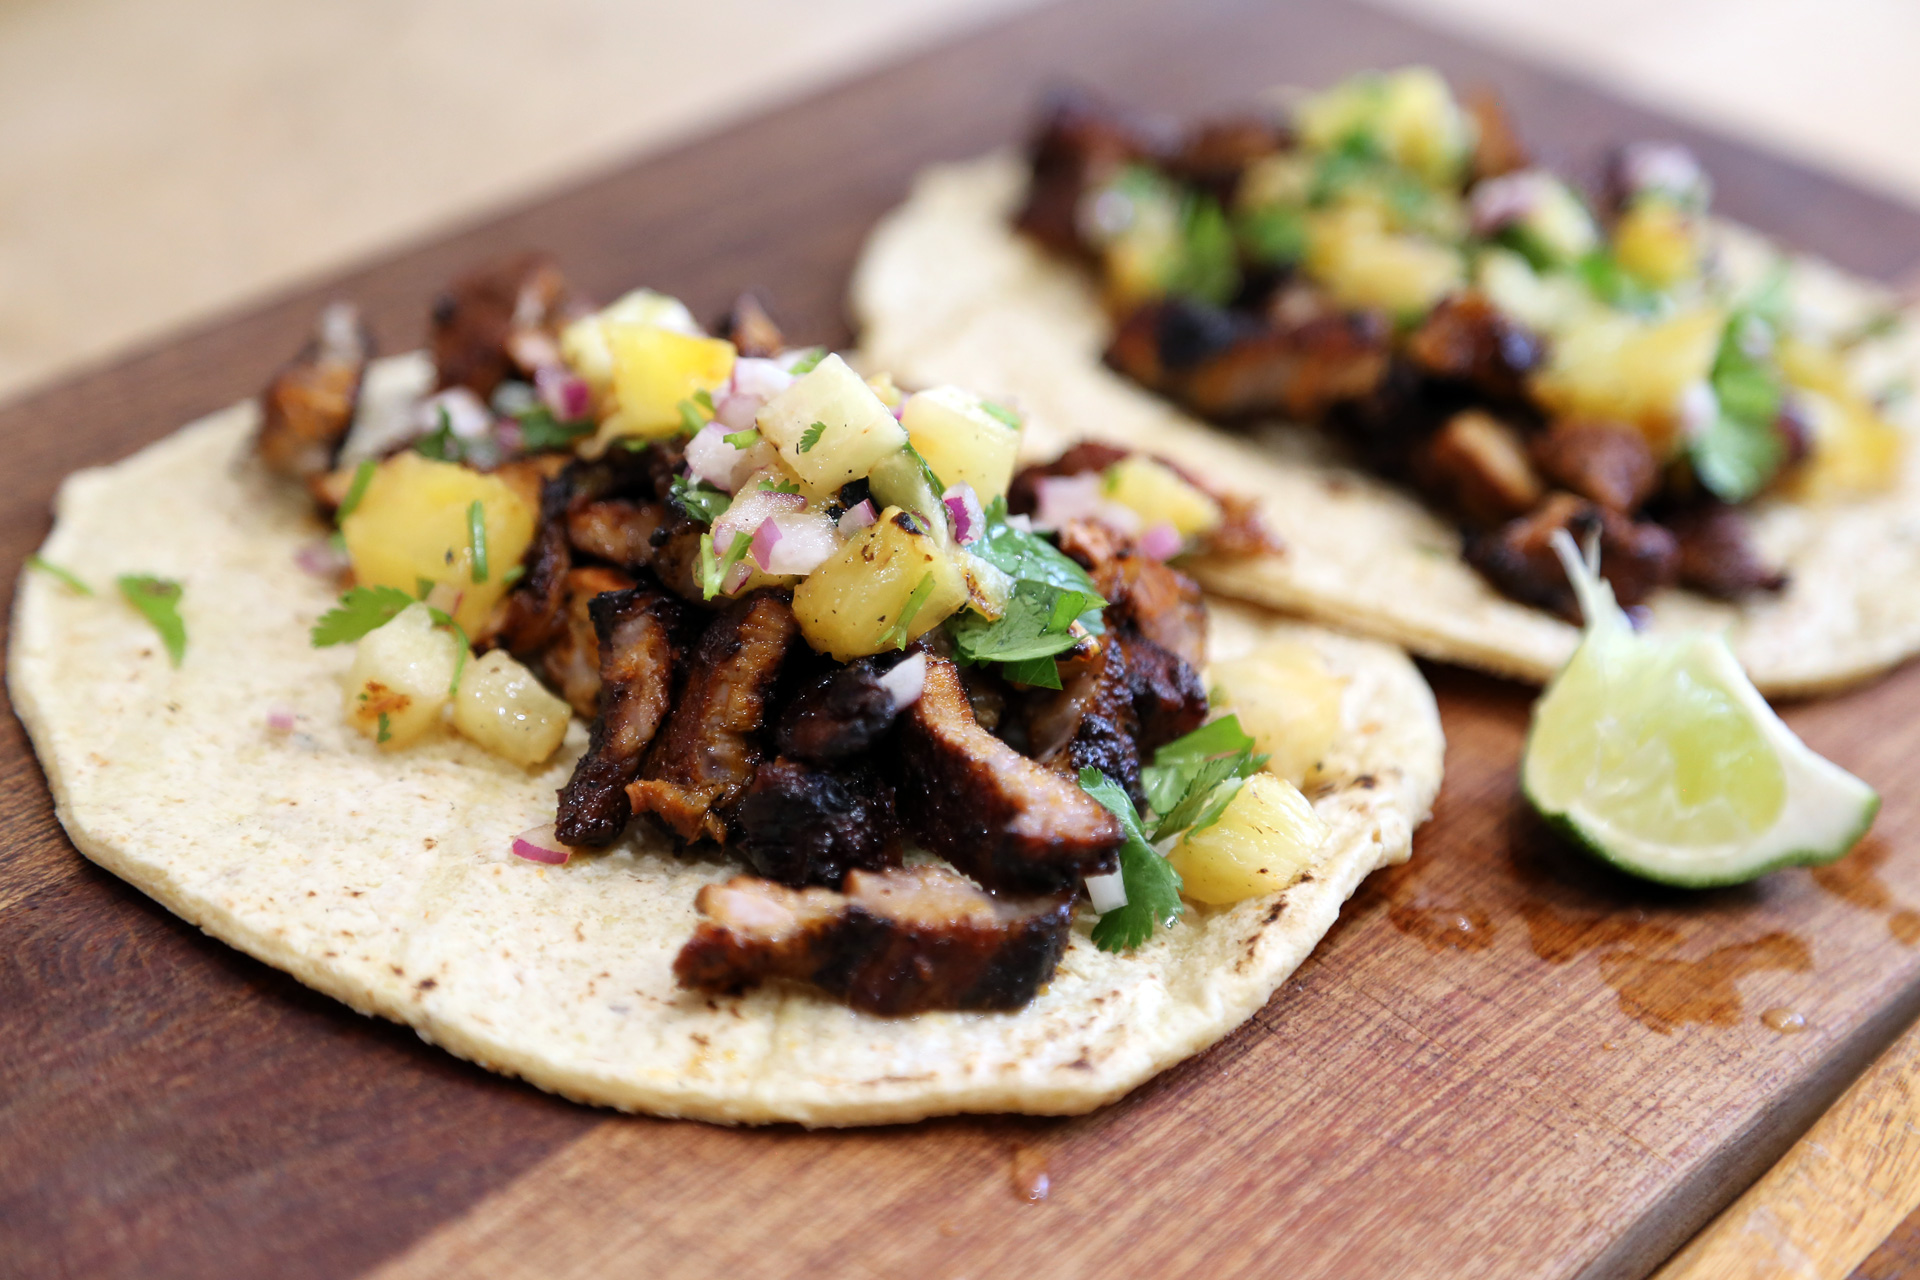 Serve Grilled Pork Tacos, Al Pastor Style with more lime on the side.